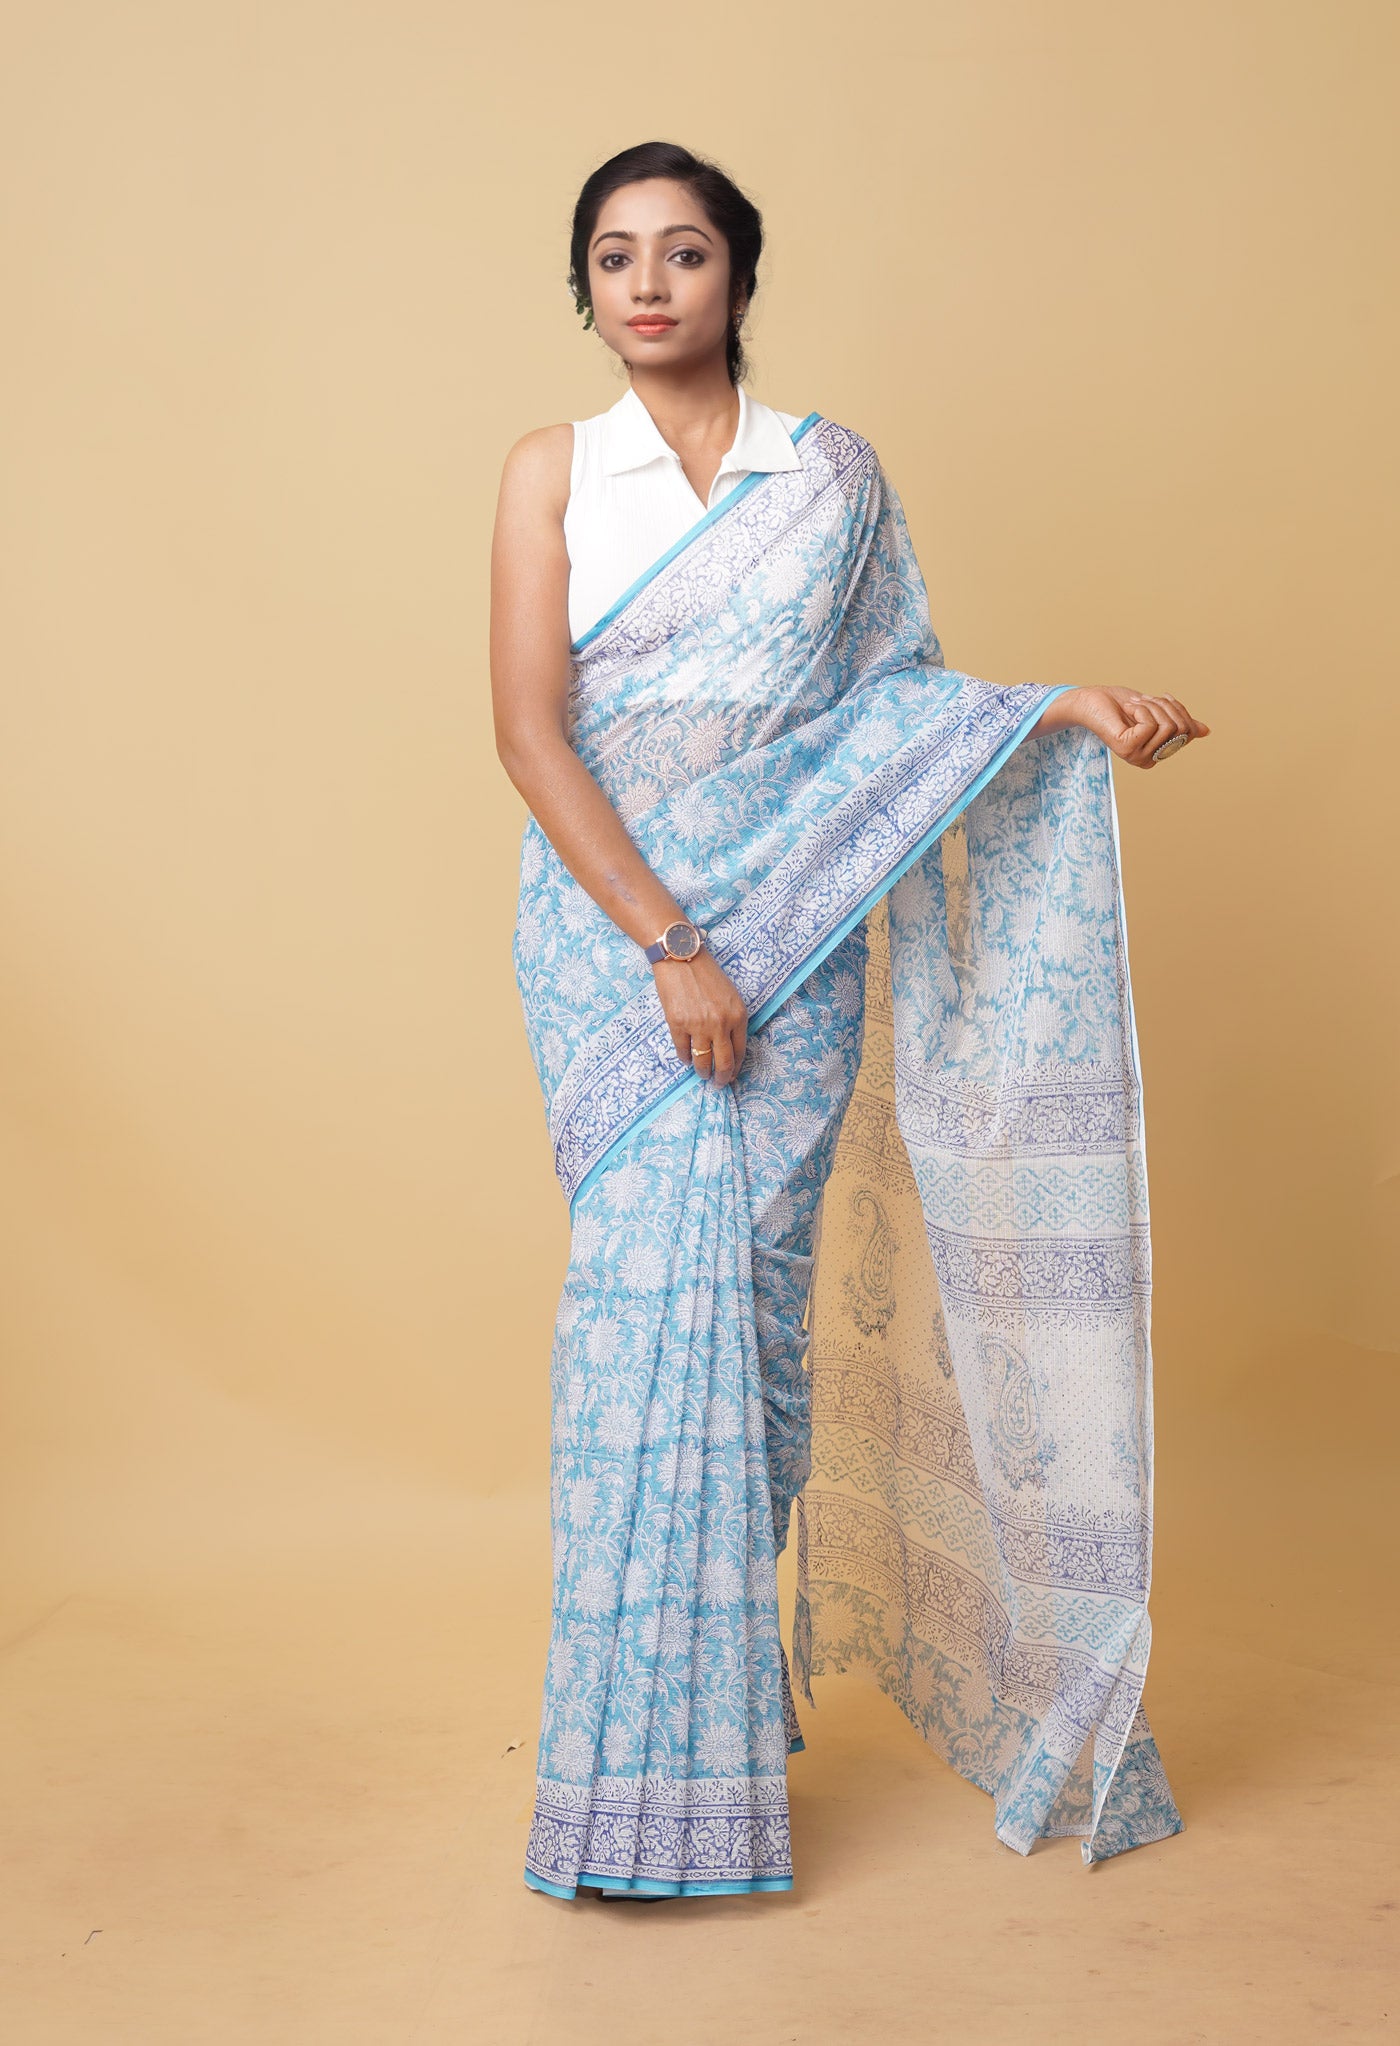 Learn how to wear a saree for that slim fit look